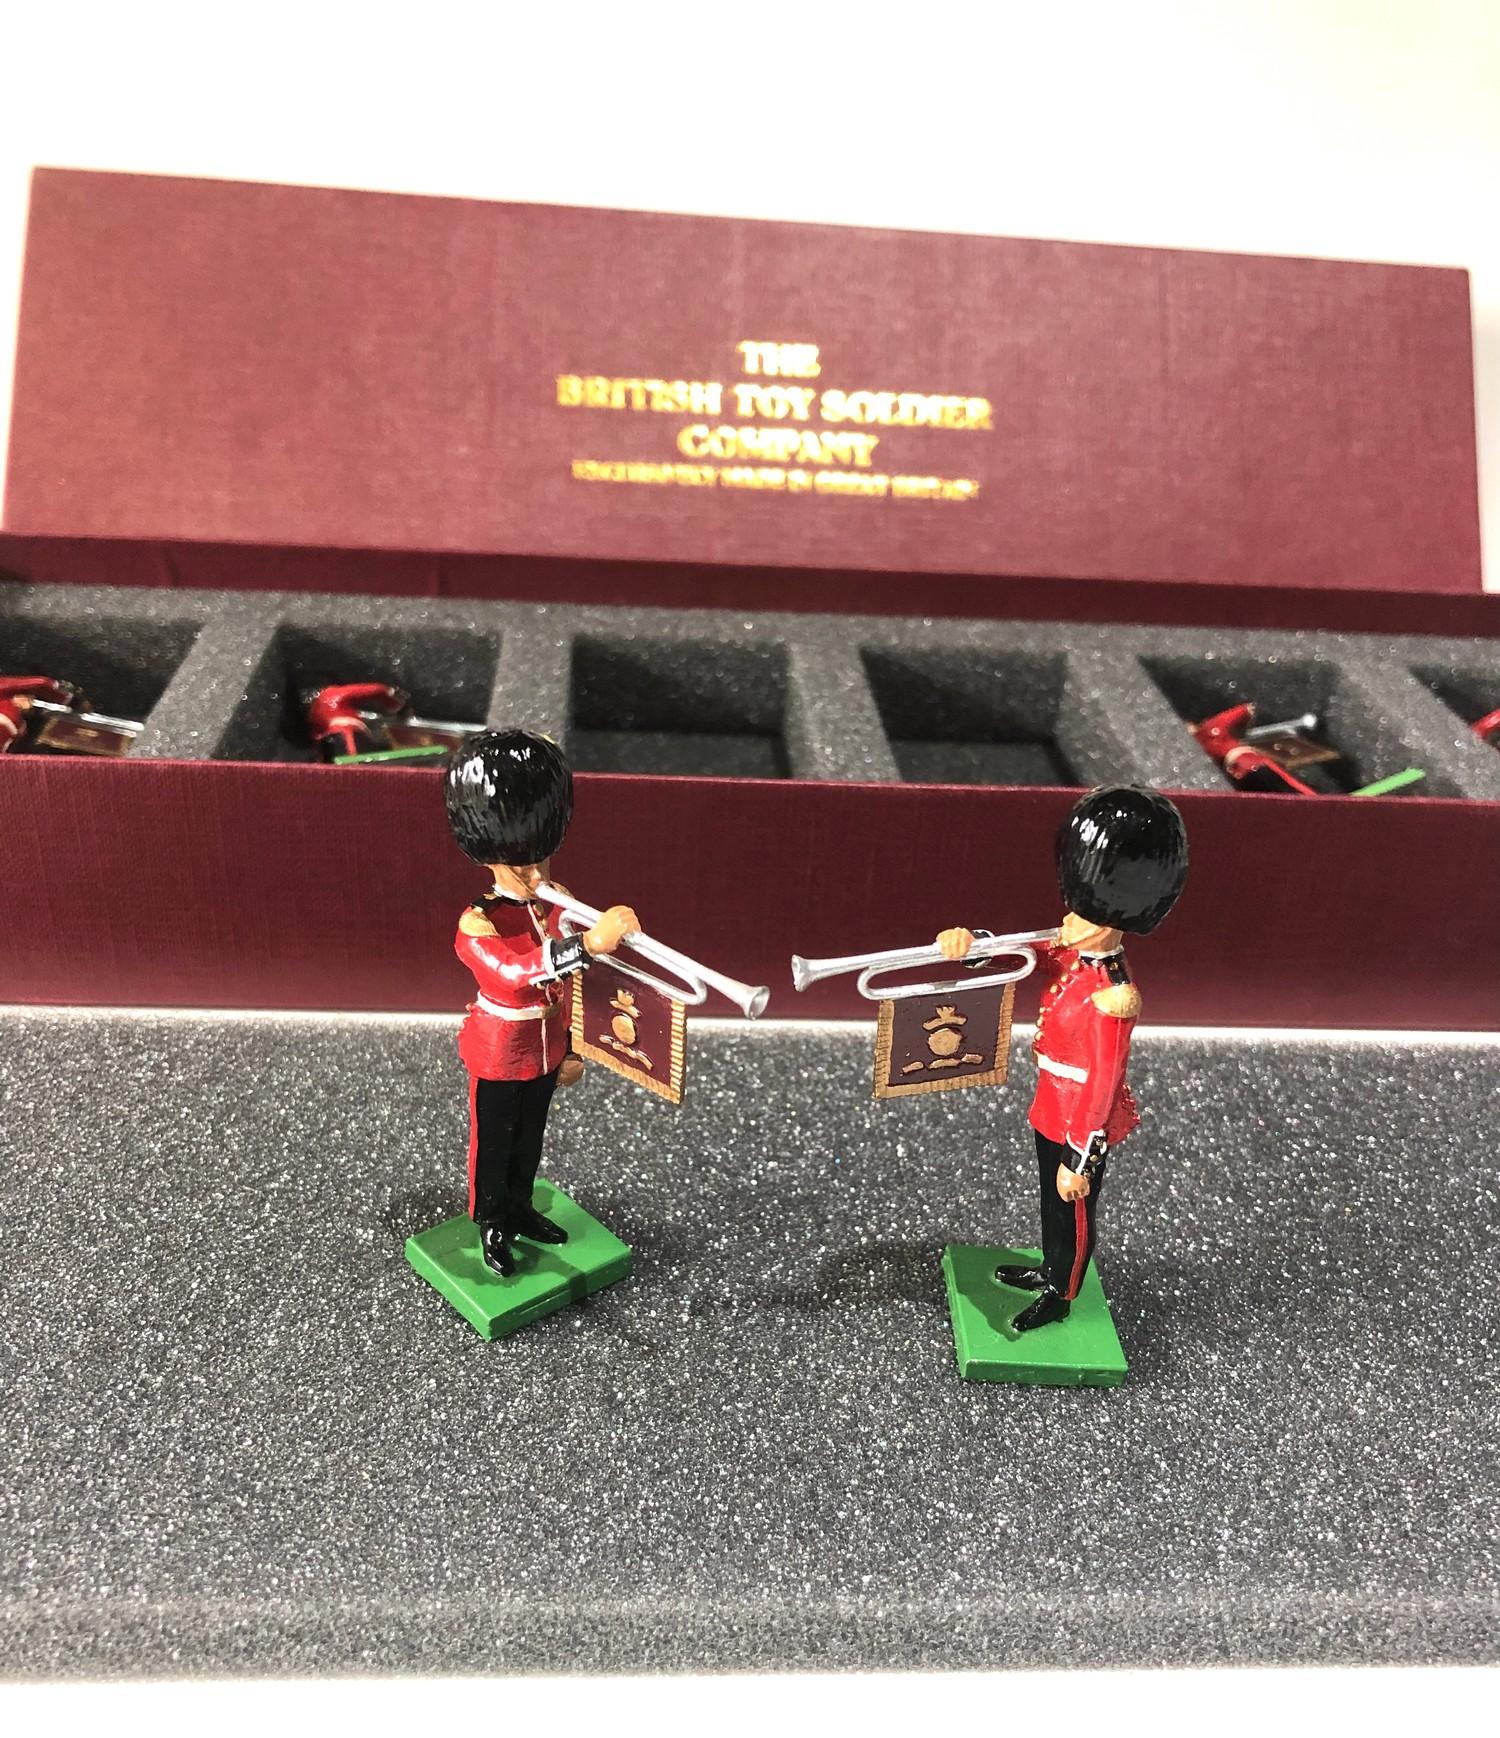 The British toy soldier company boxed set - Image 2 of 2